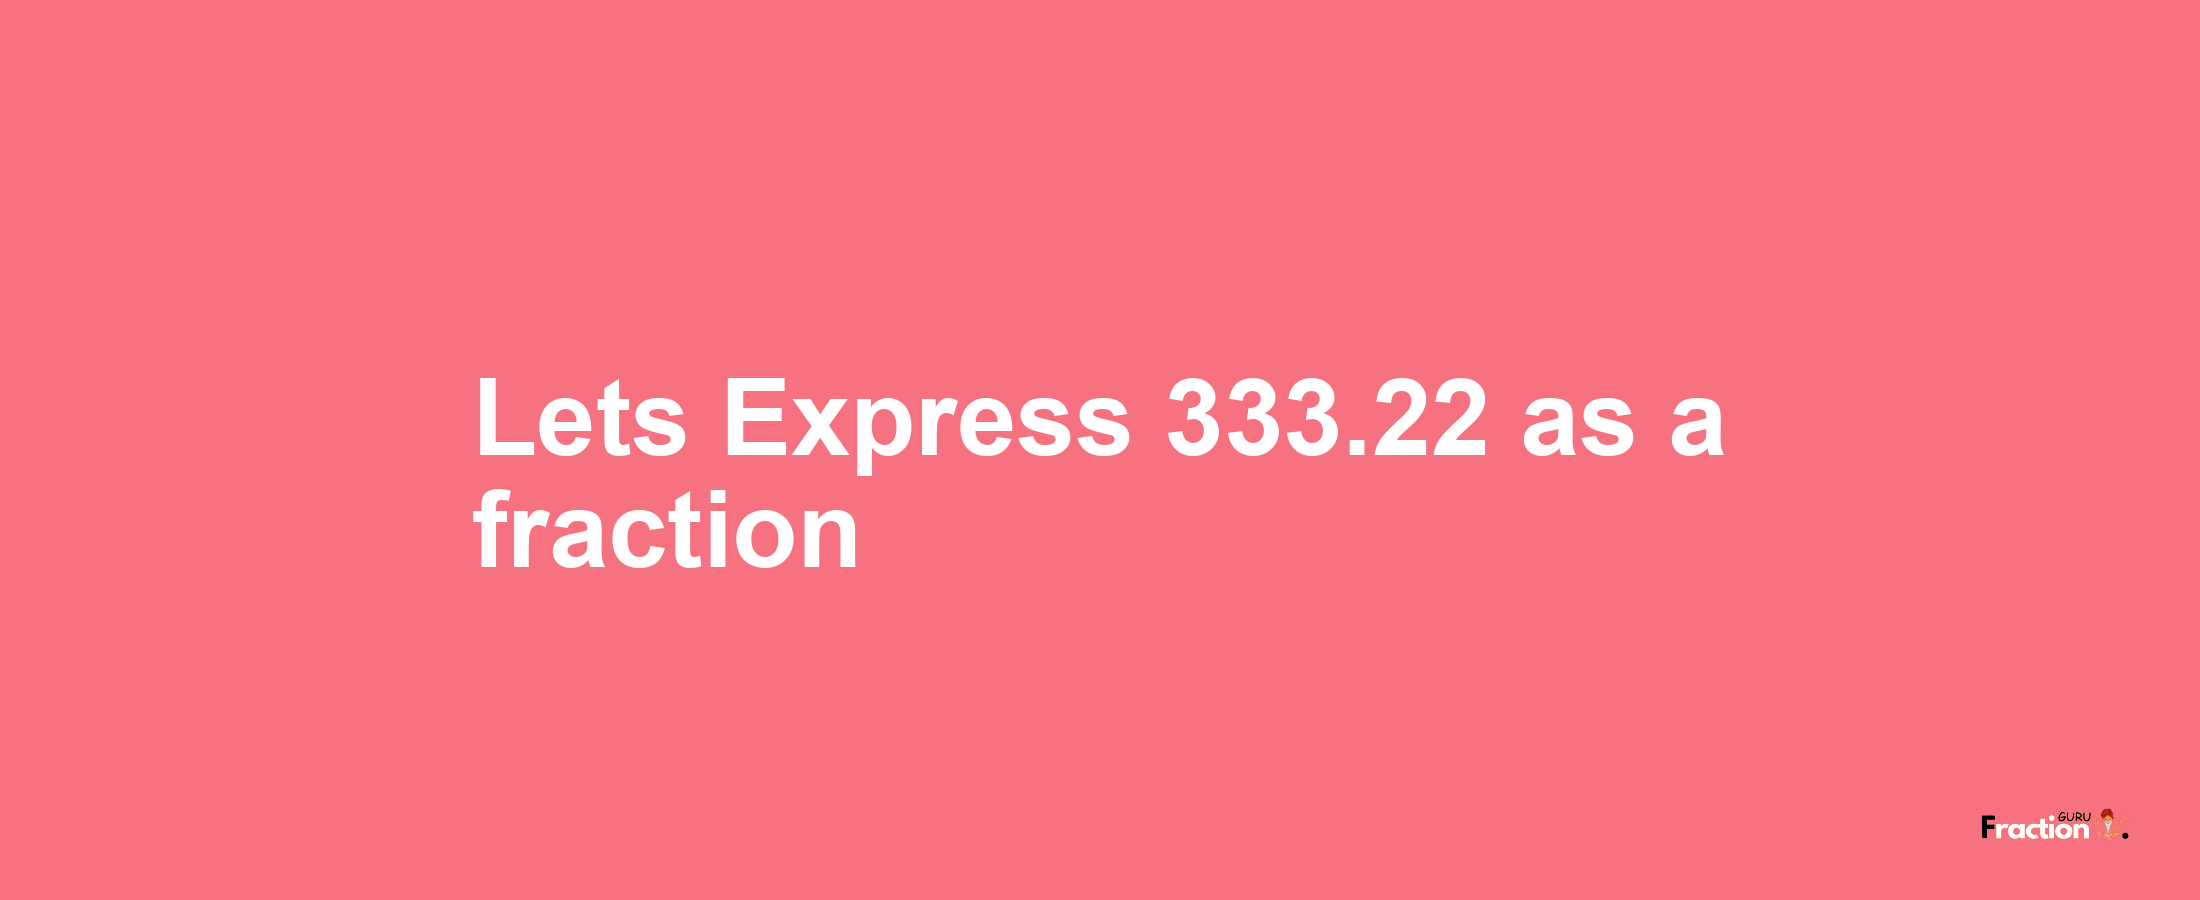 Lets Express 333.22 as afraction